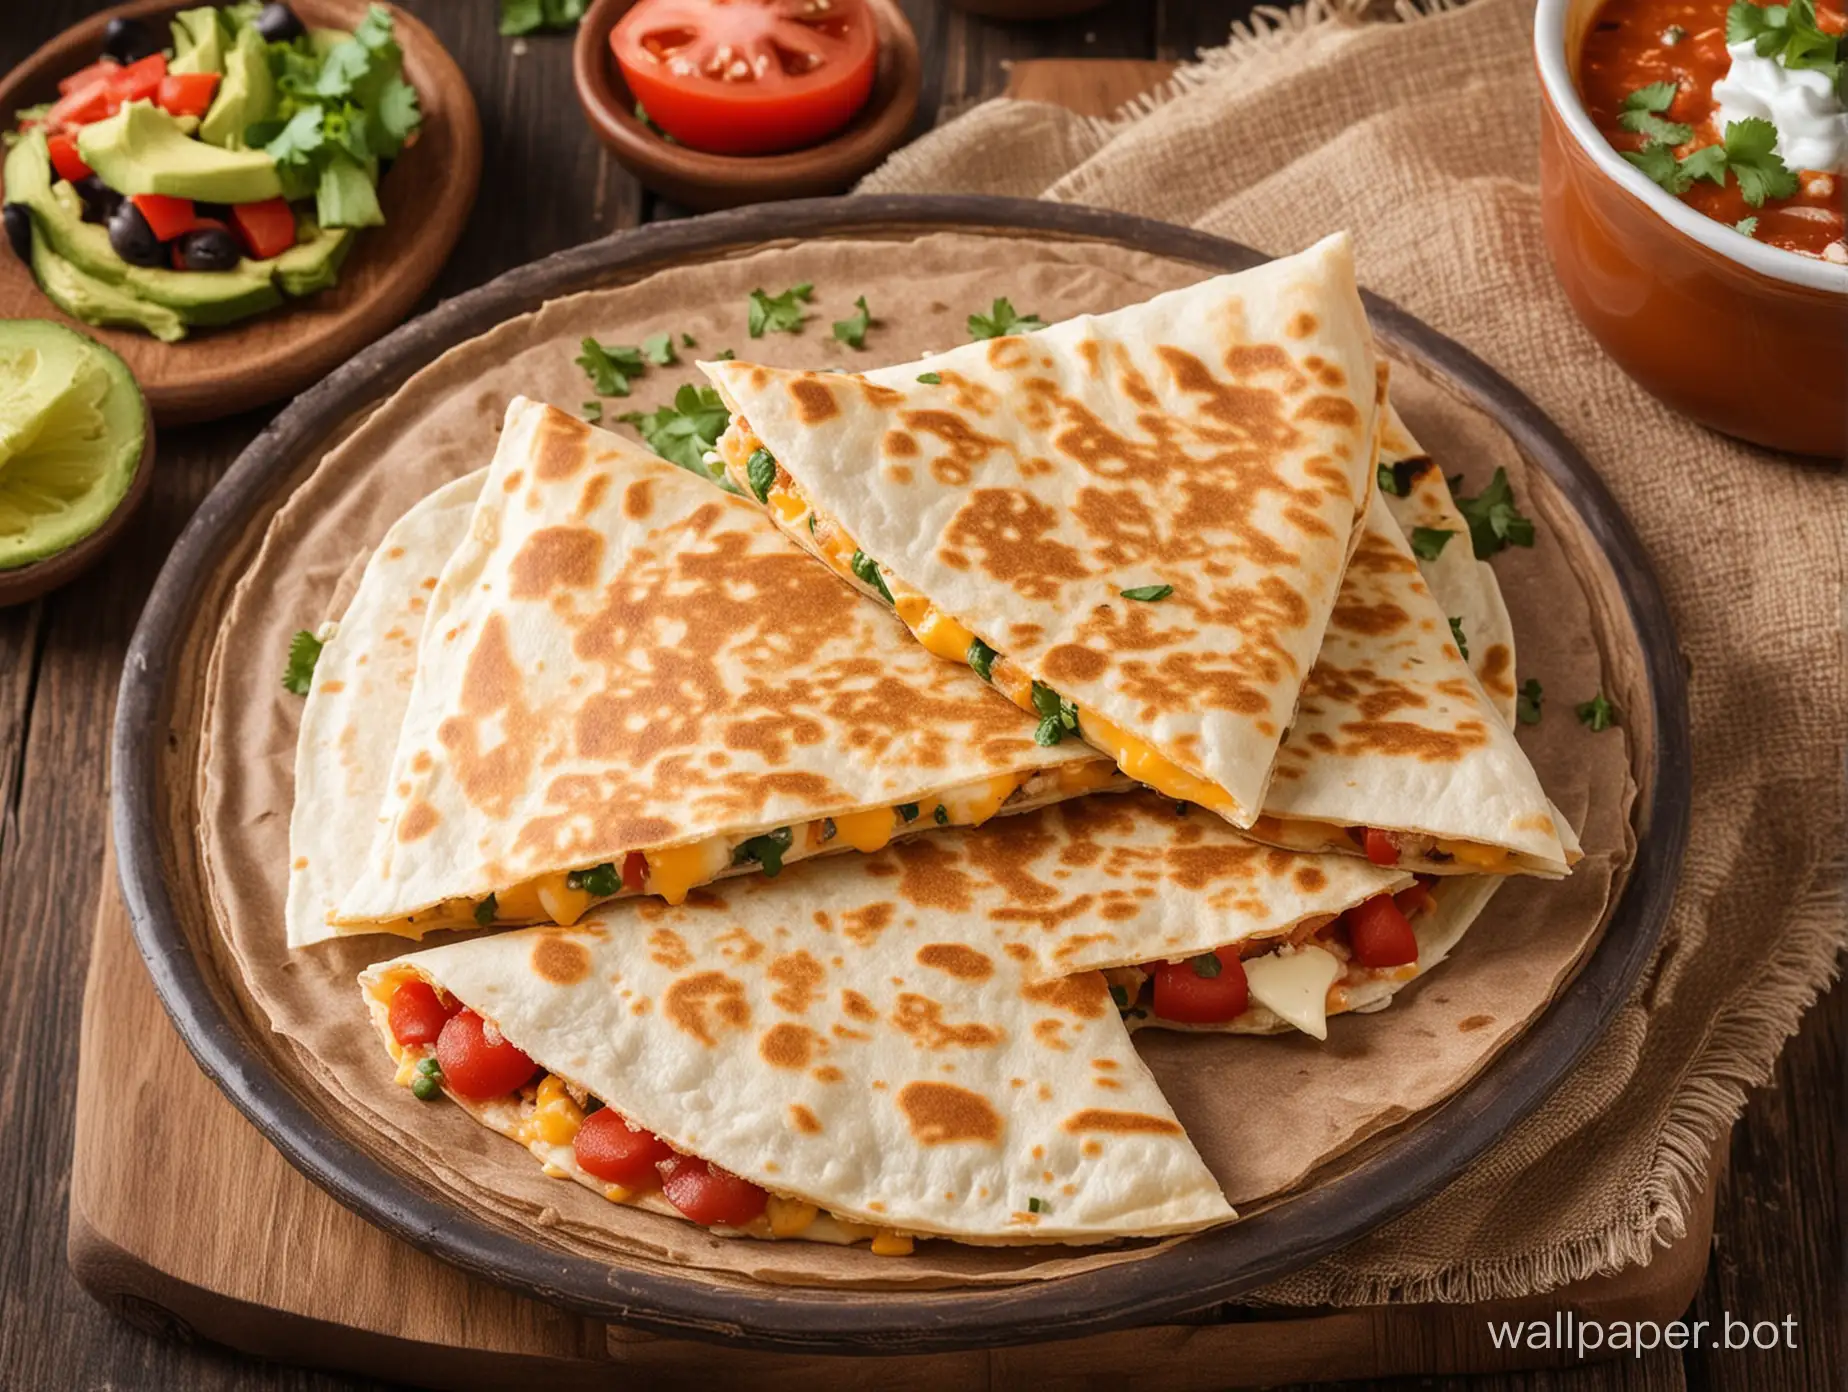 Delicious-Mexican-Cheese-Quesadilla-Authentic-Culinary-Delight-with-Melted-Cheese-and-Tortilla